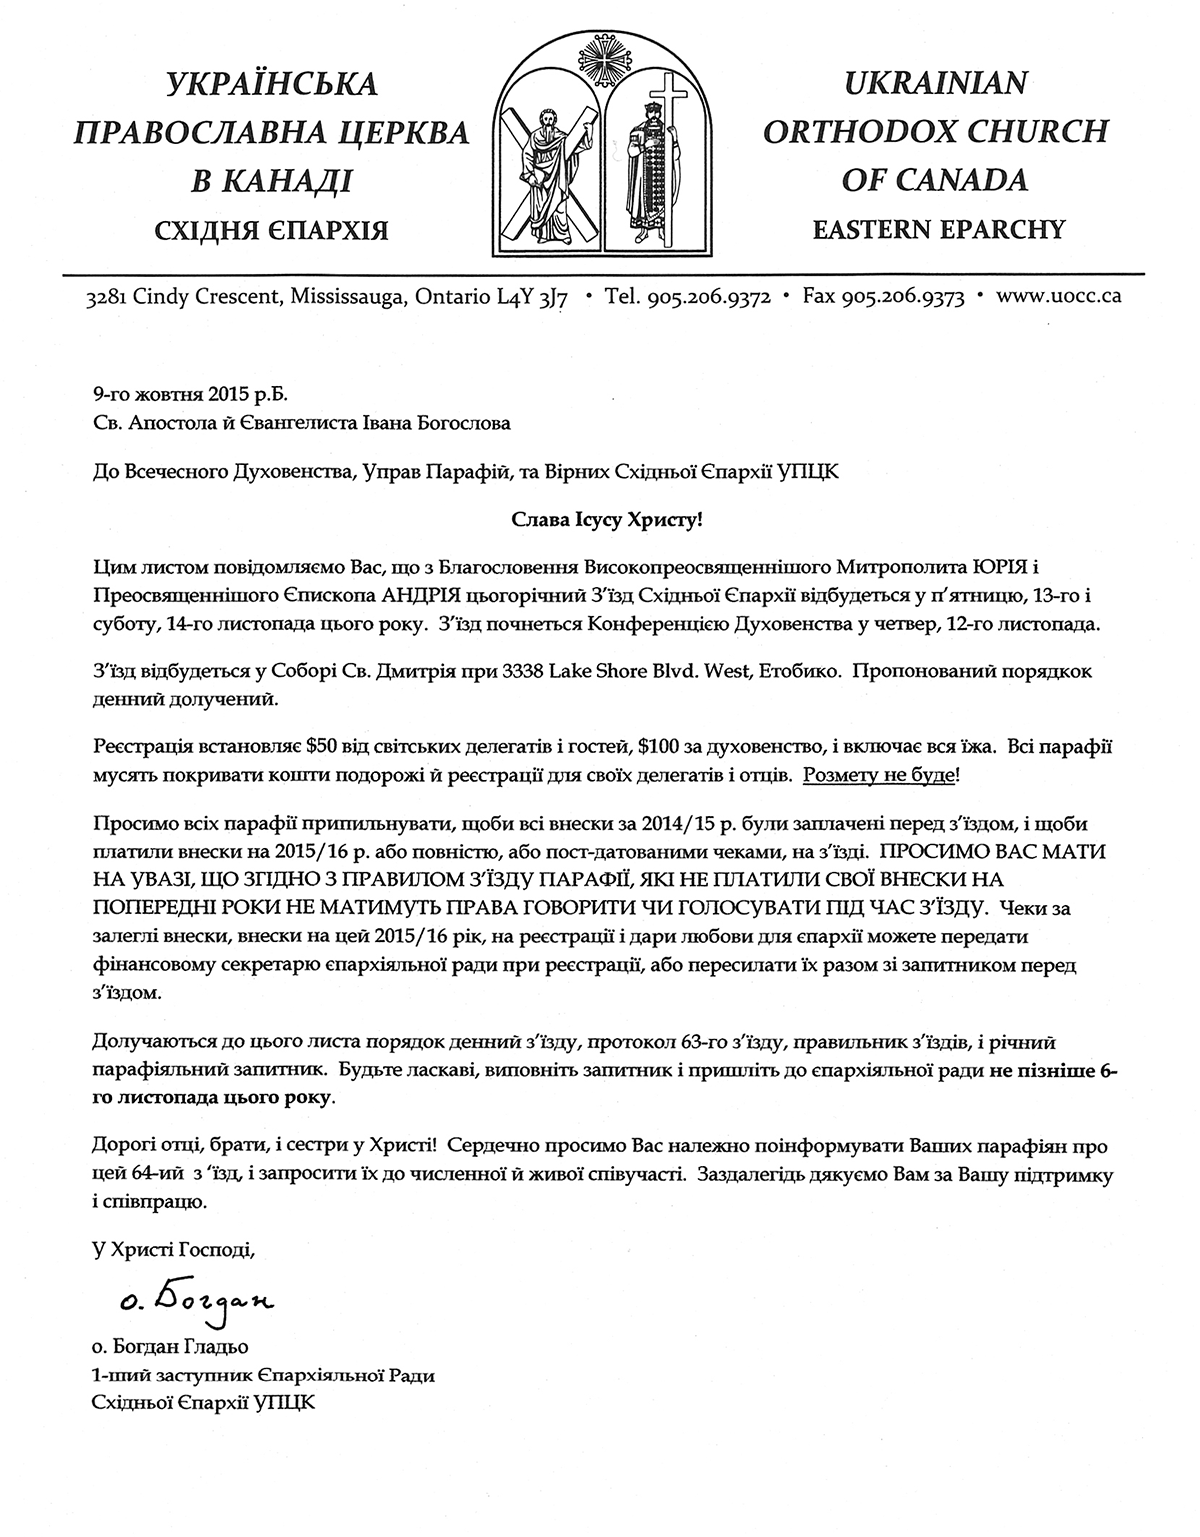 uocc-east_EEC-2015-Cover-Letter-001